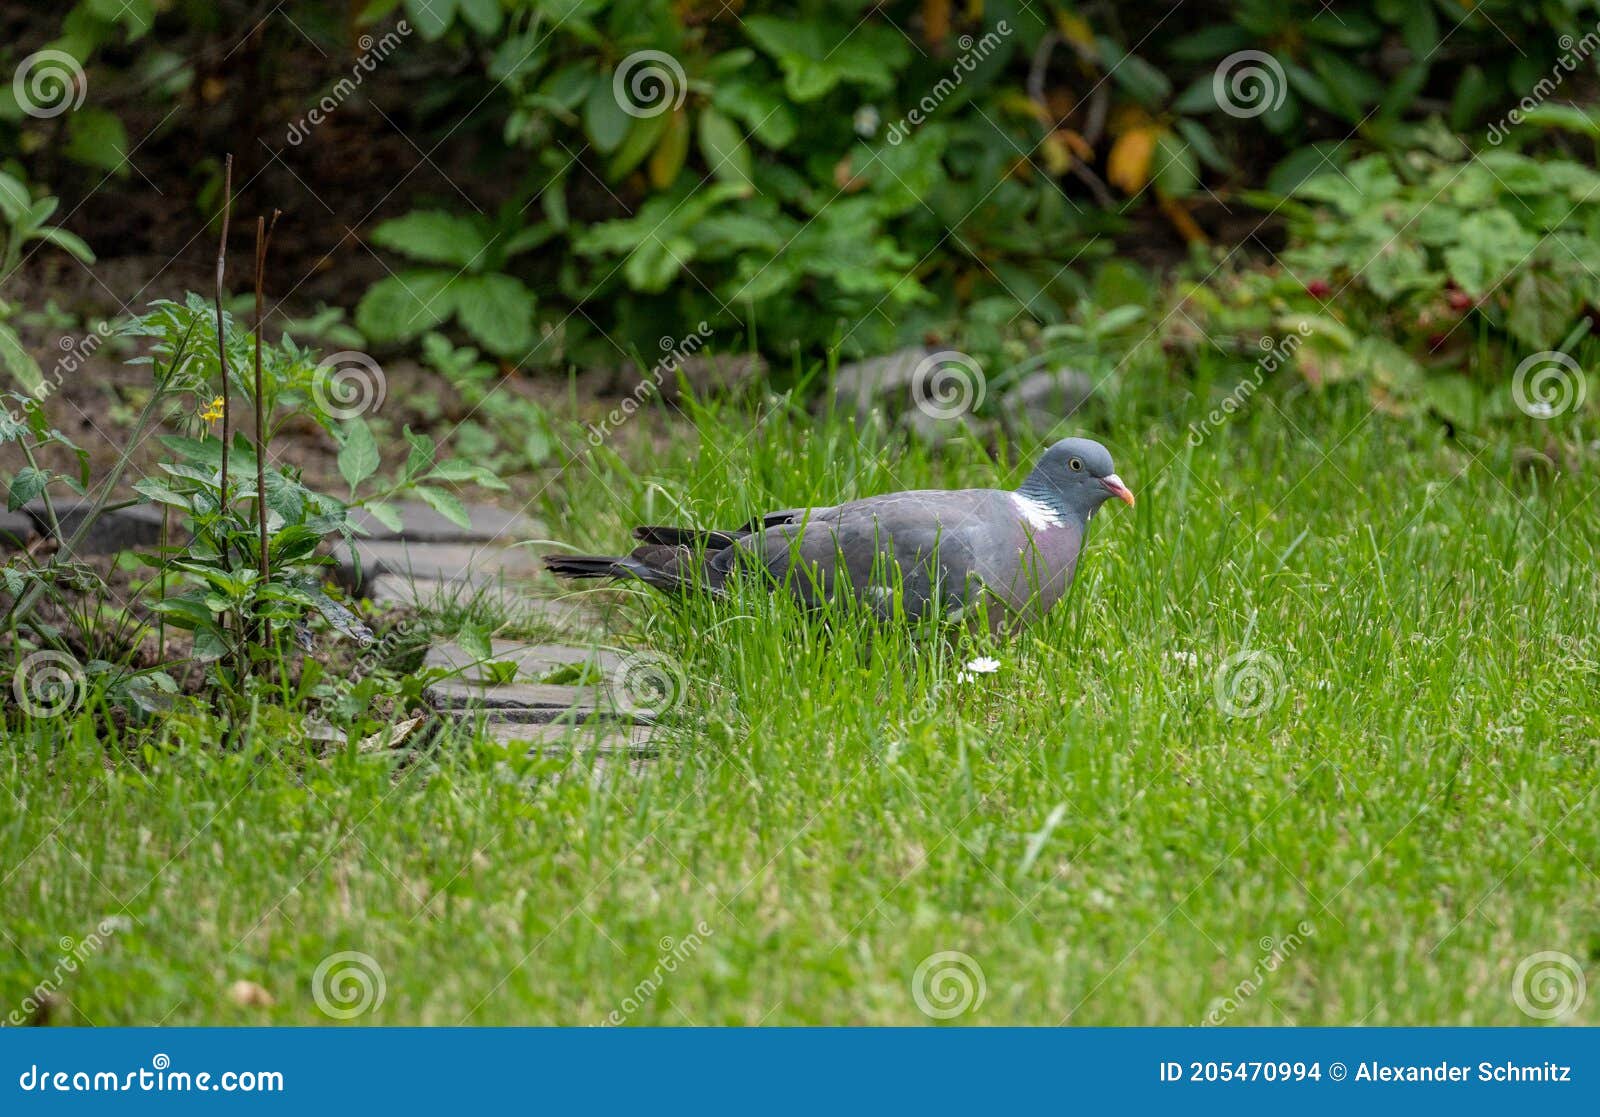 pidgeon searching for grass seeds in garden in summer time